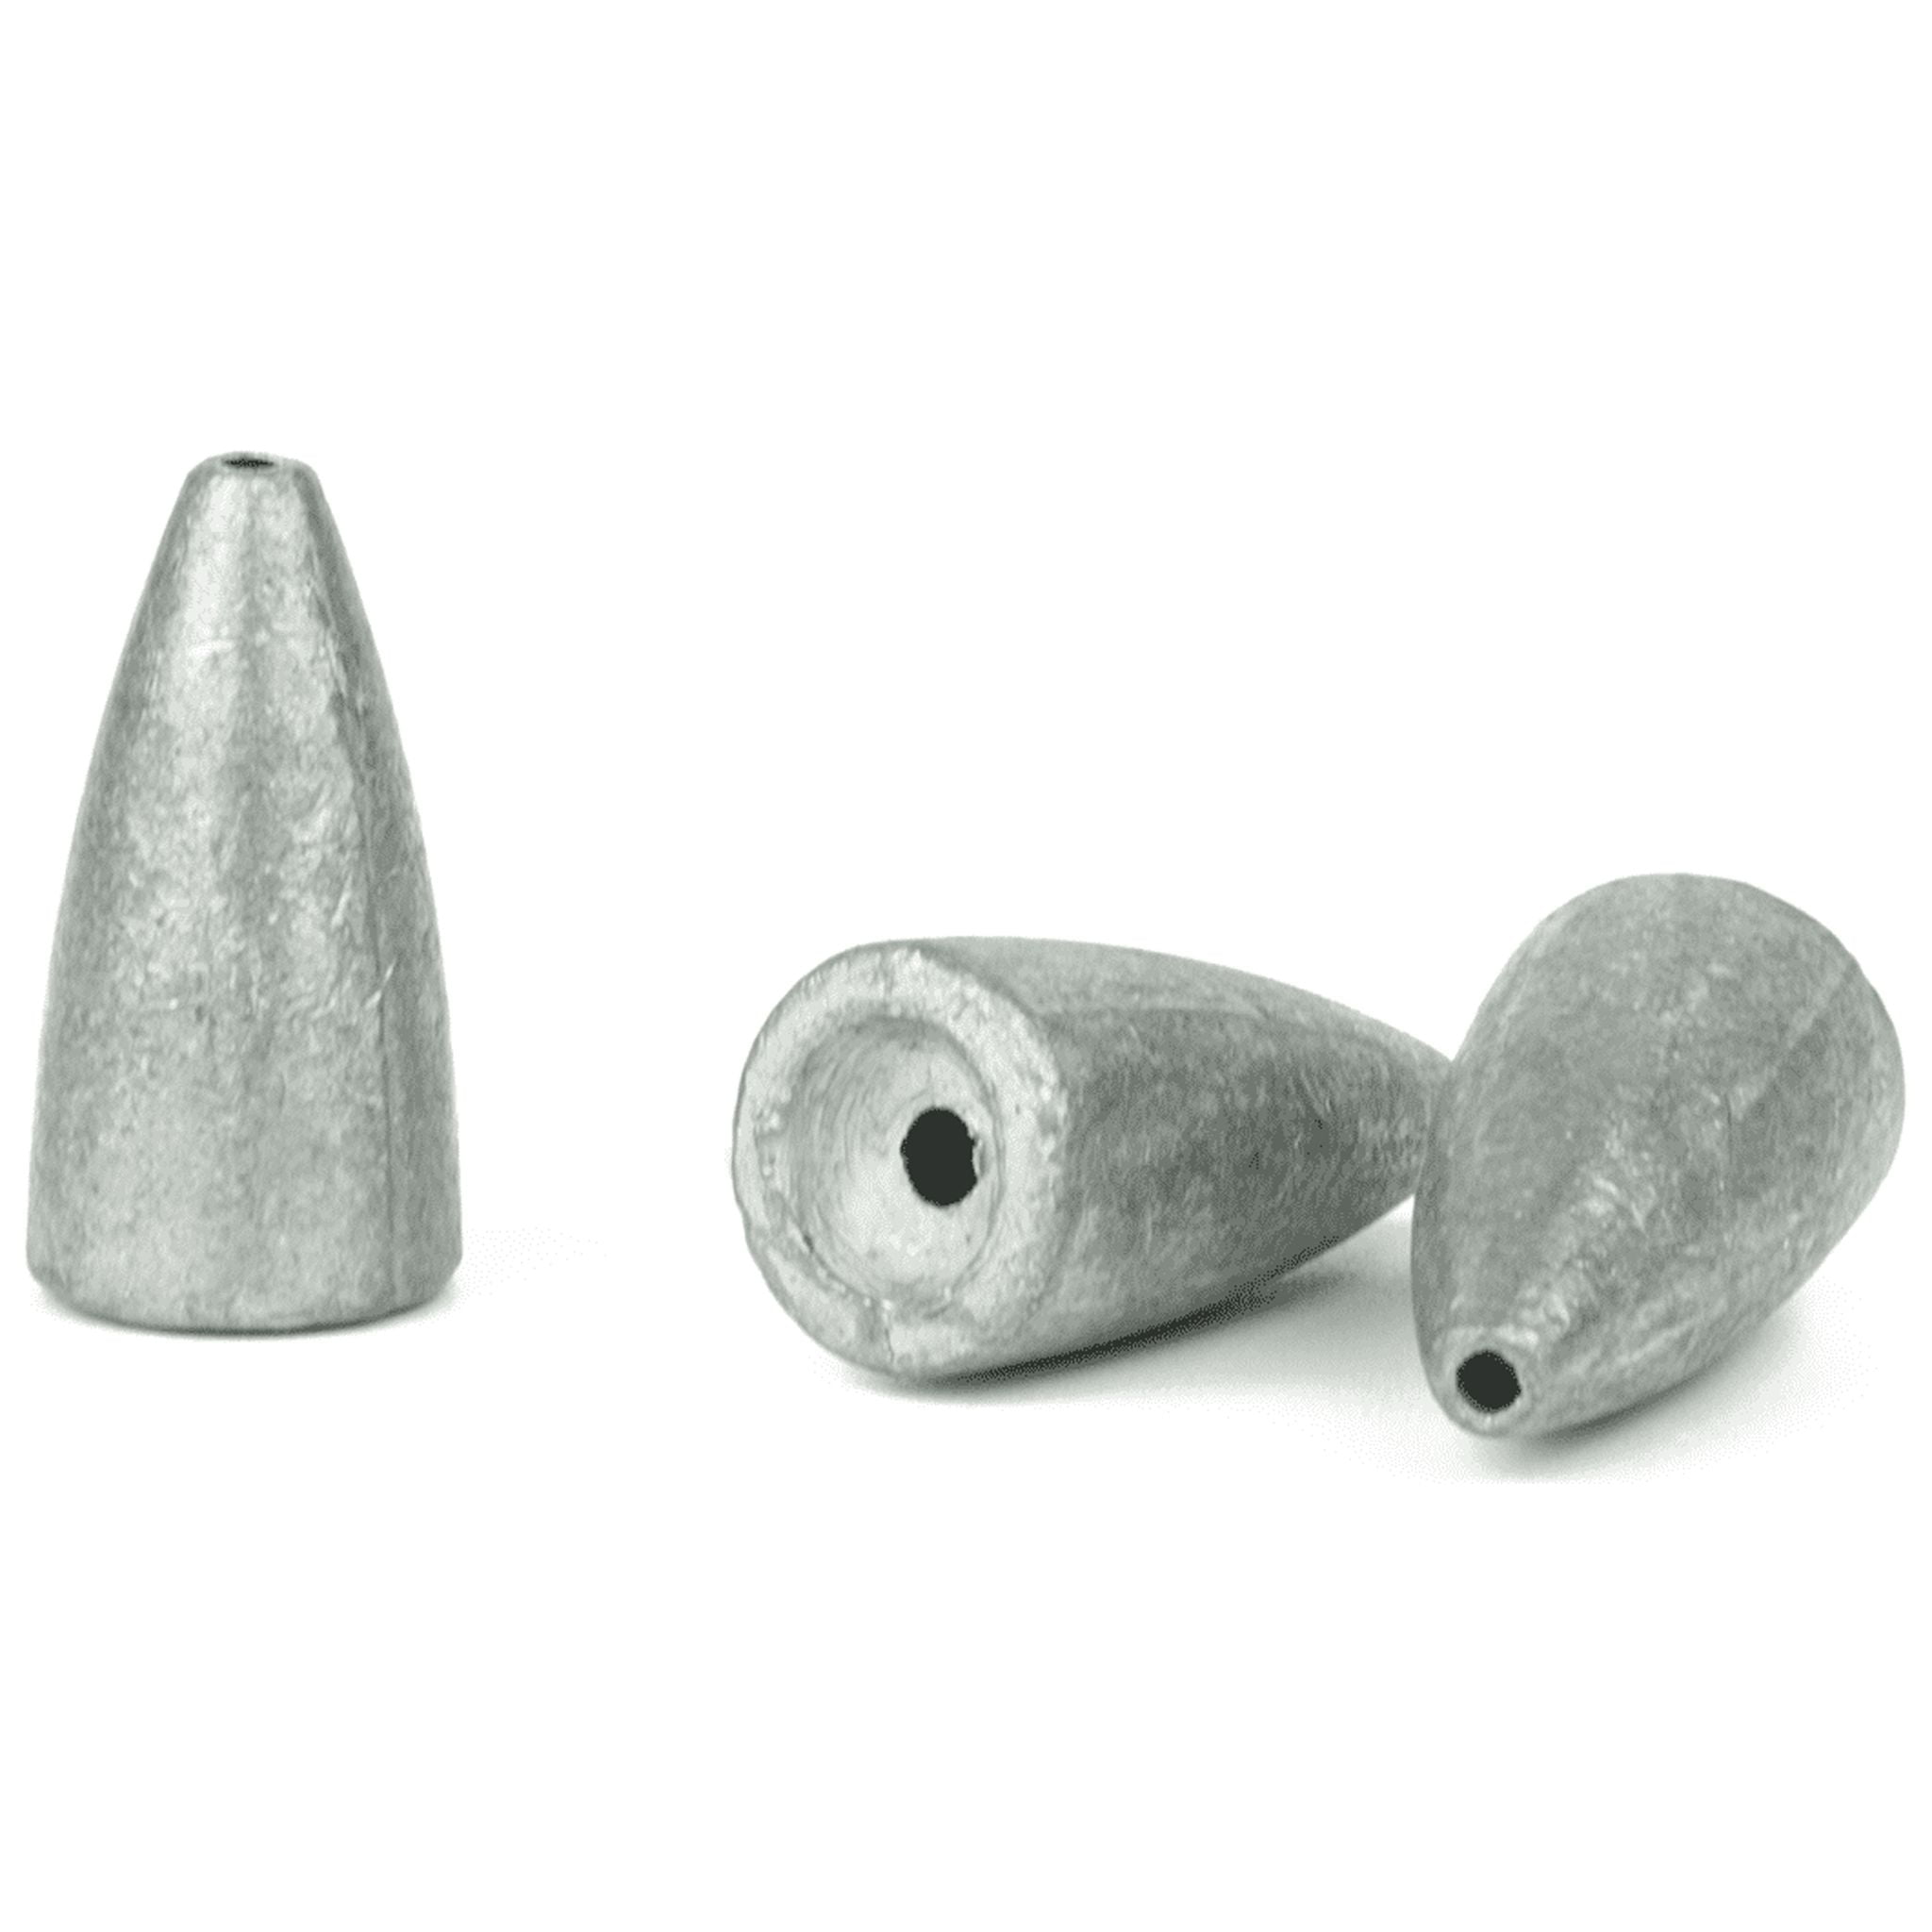 Bullet Weights® BW18-24 Lead Bullet Weight Size 1/8 oz Fishing Weights